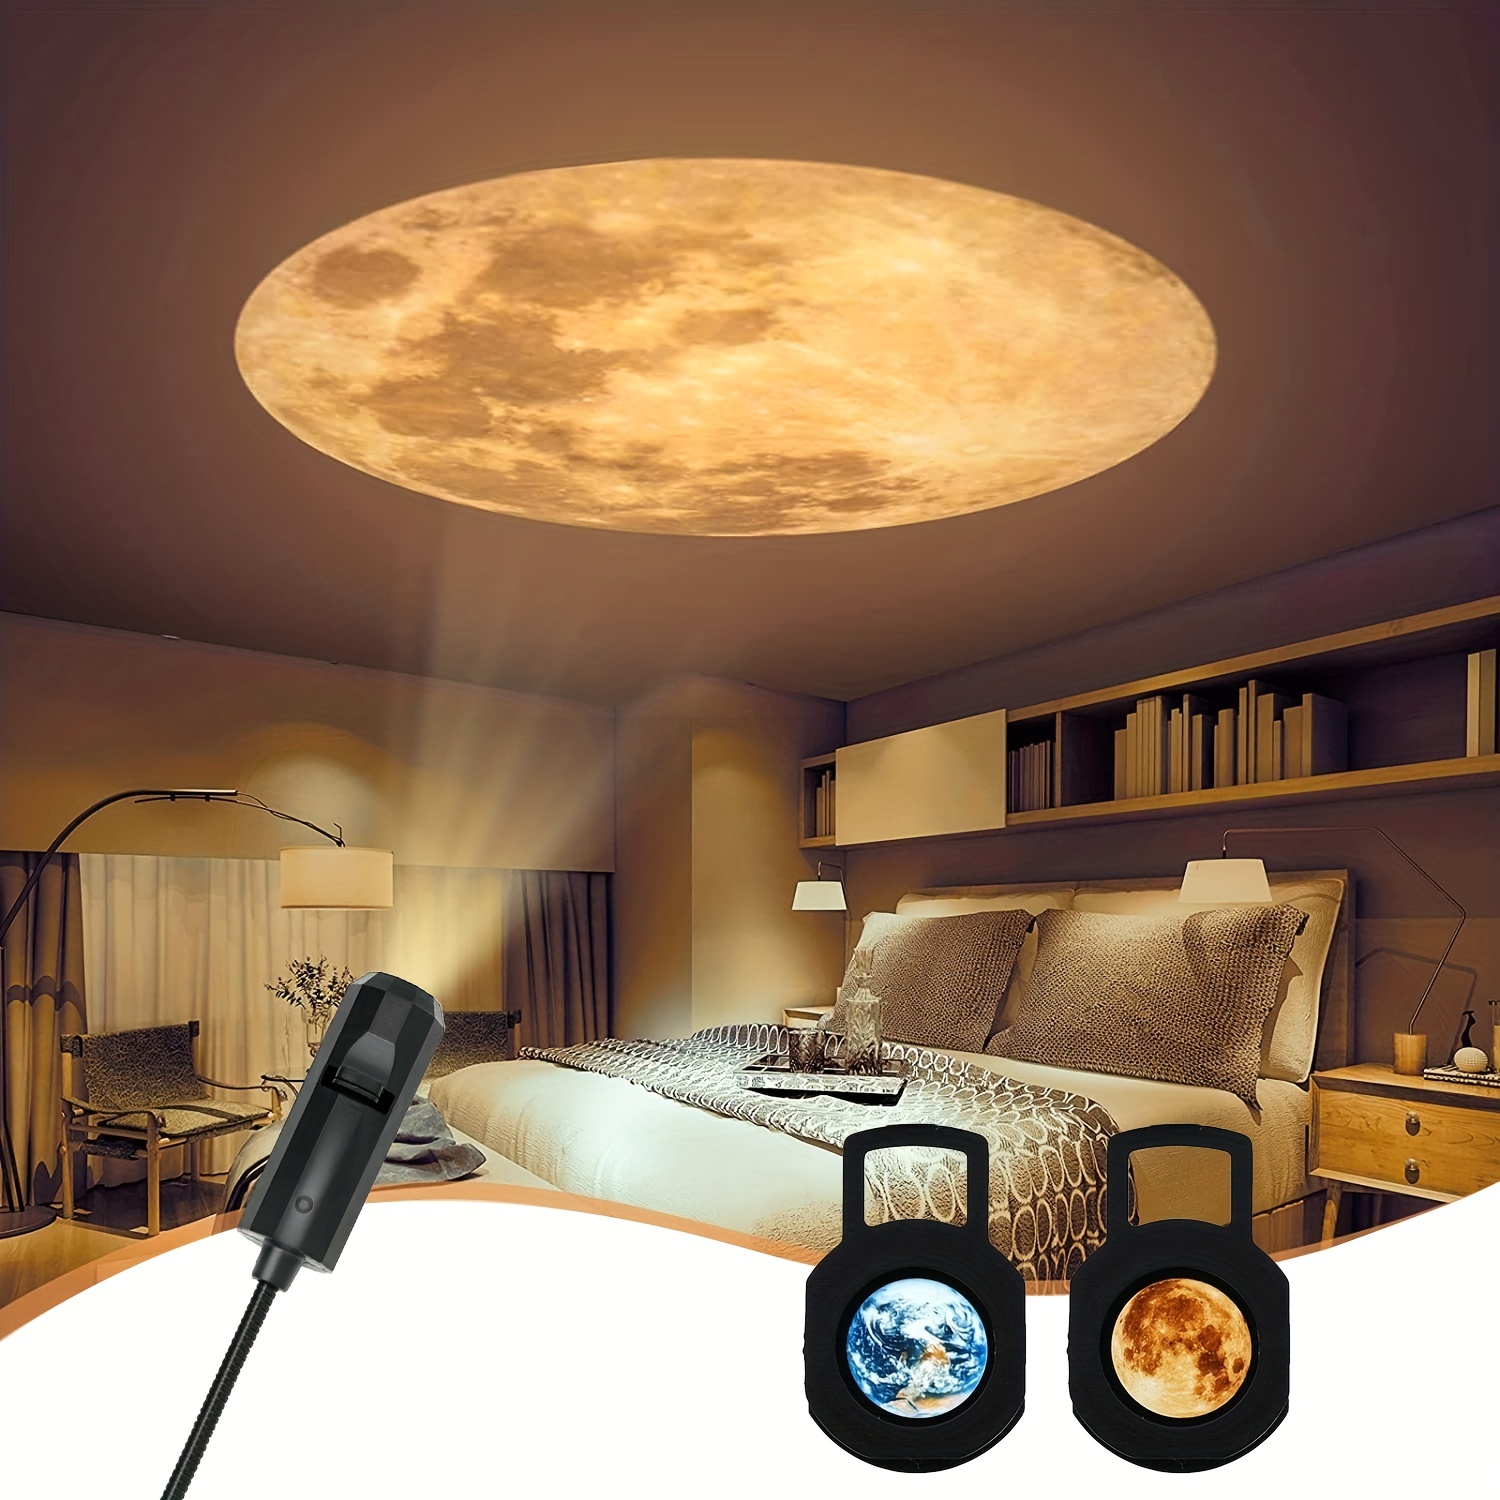 

Moon Earth Projector Usb Night Light 360 ° Rotating Moon Atmospheric Projector Is Used For Home Bedside Tables And Bedroom Living Room Halloween/thanksgiving Day/christmas Gift